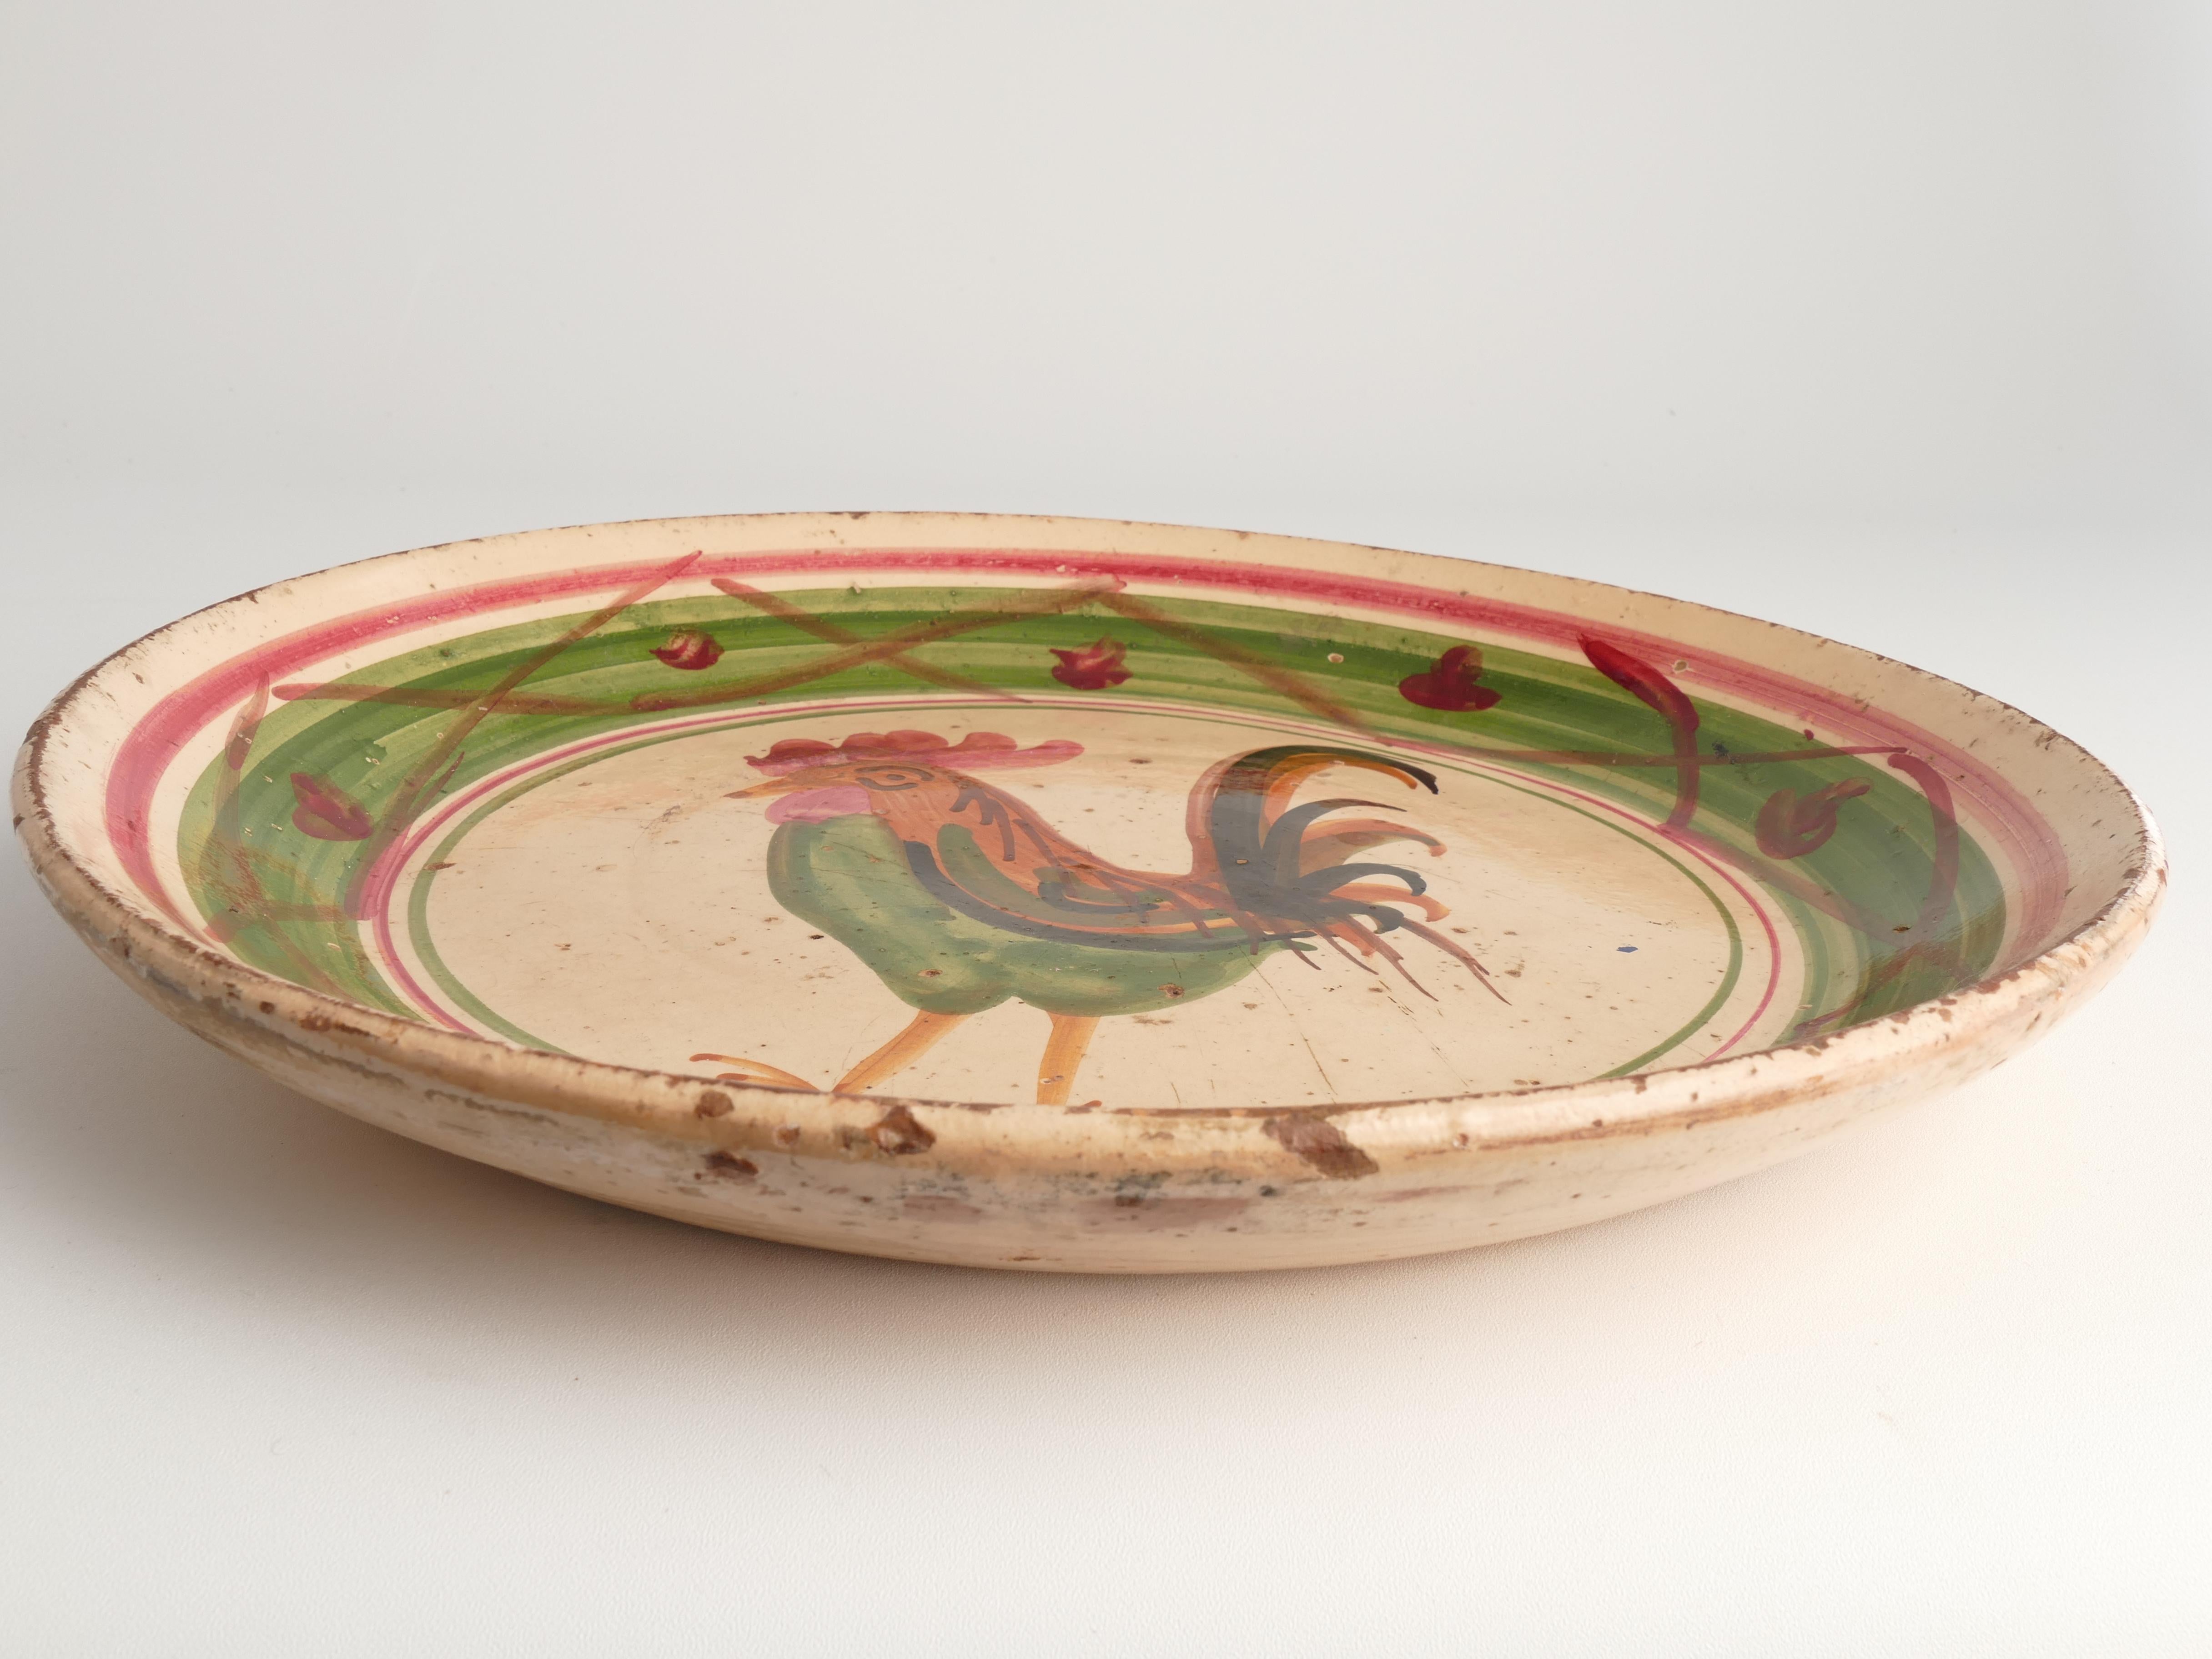 A large milk bowl crafted from ball clay features a rooster motif in red, green, and brown. This piece, originating from the mid-19th century, is adorned with engobe—a mixture of pipe clay and water, tinted with manganese for brown, copper oxide for